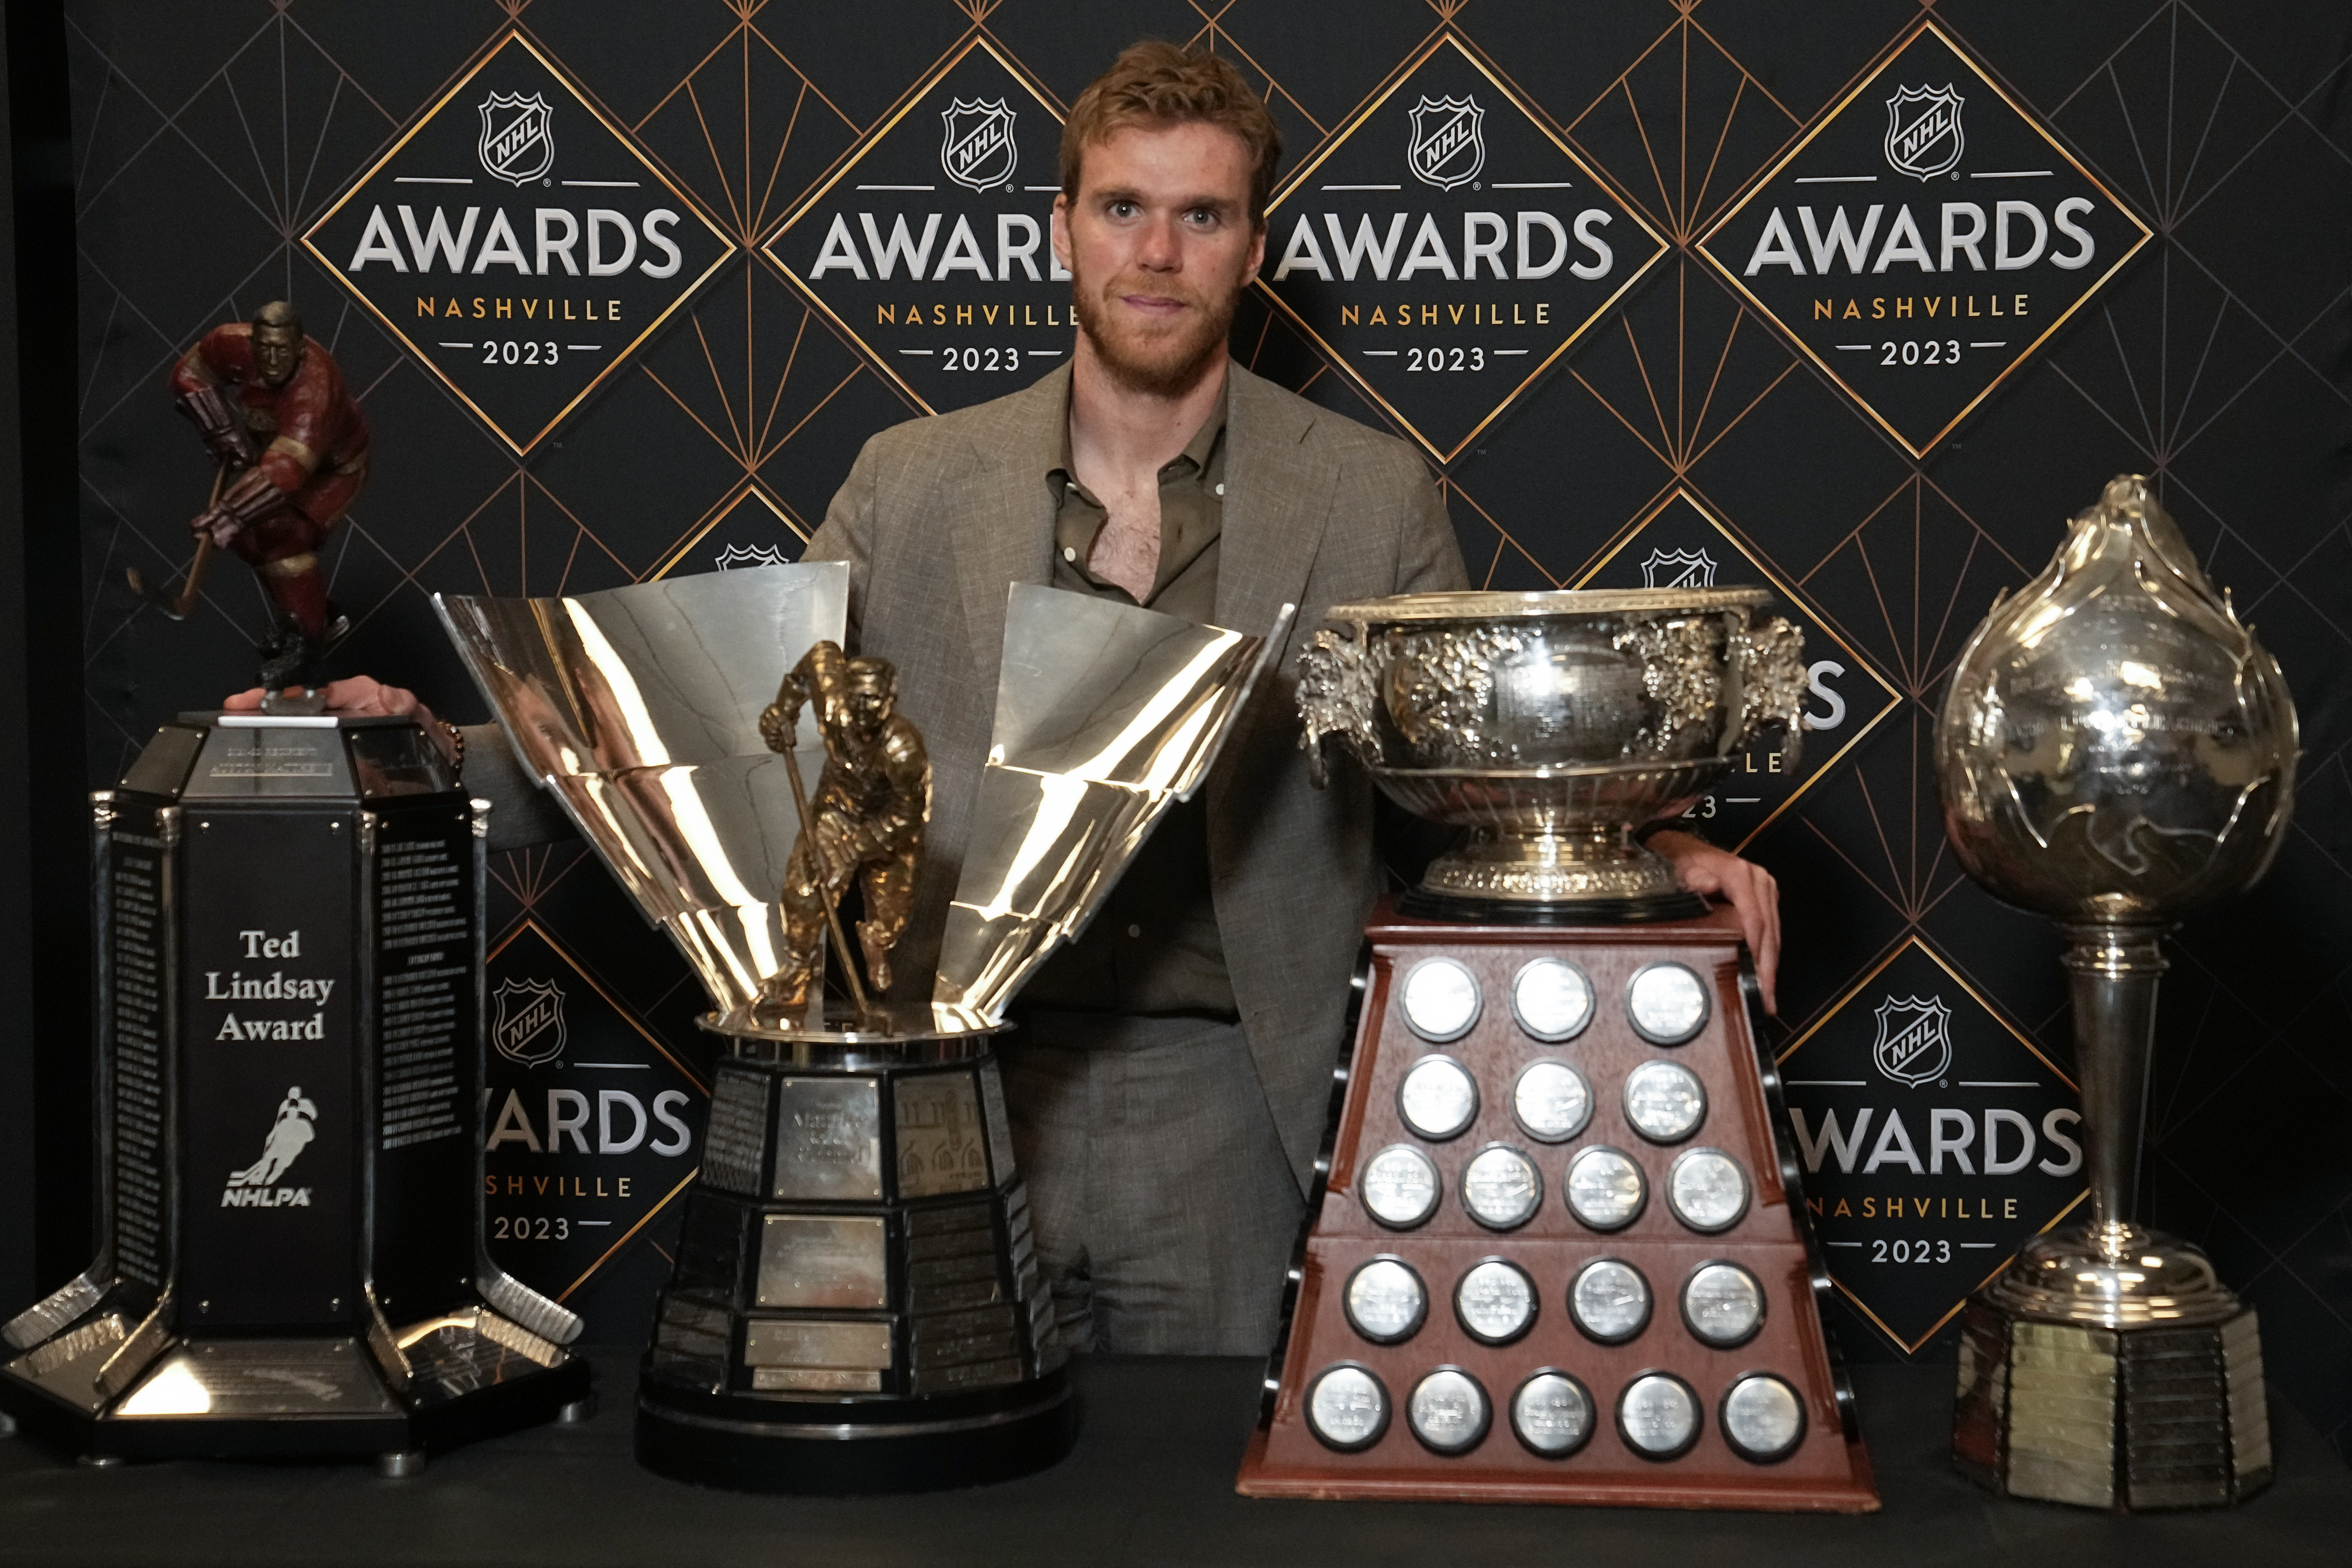 More Entertaining Than the Actual All Star Game”: 'Mini' Connor McDavid  Wins Hearts of Thousands of Fans - EssentiallySports